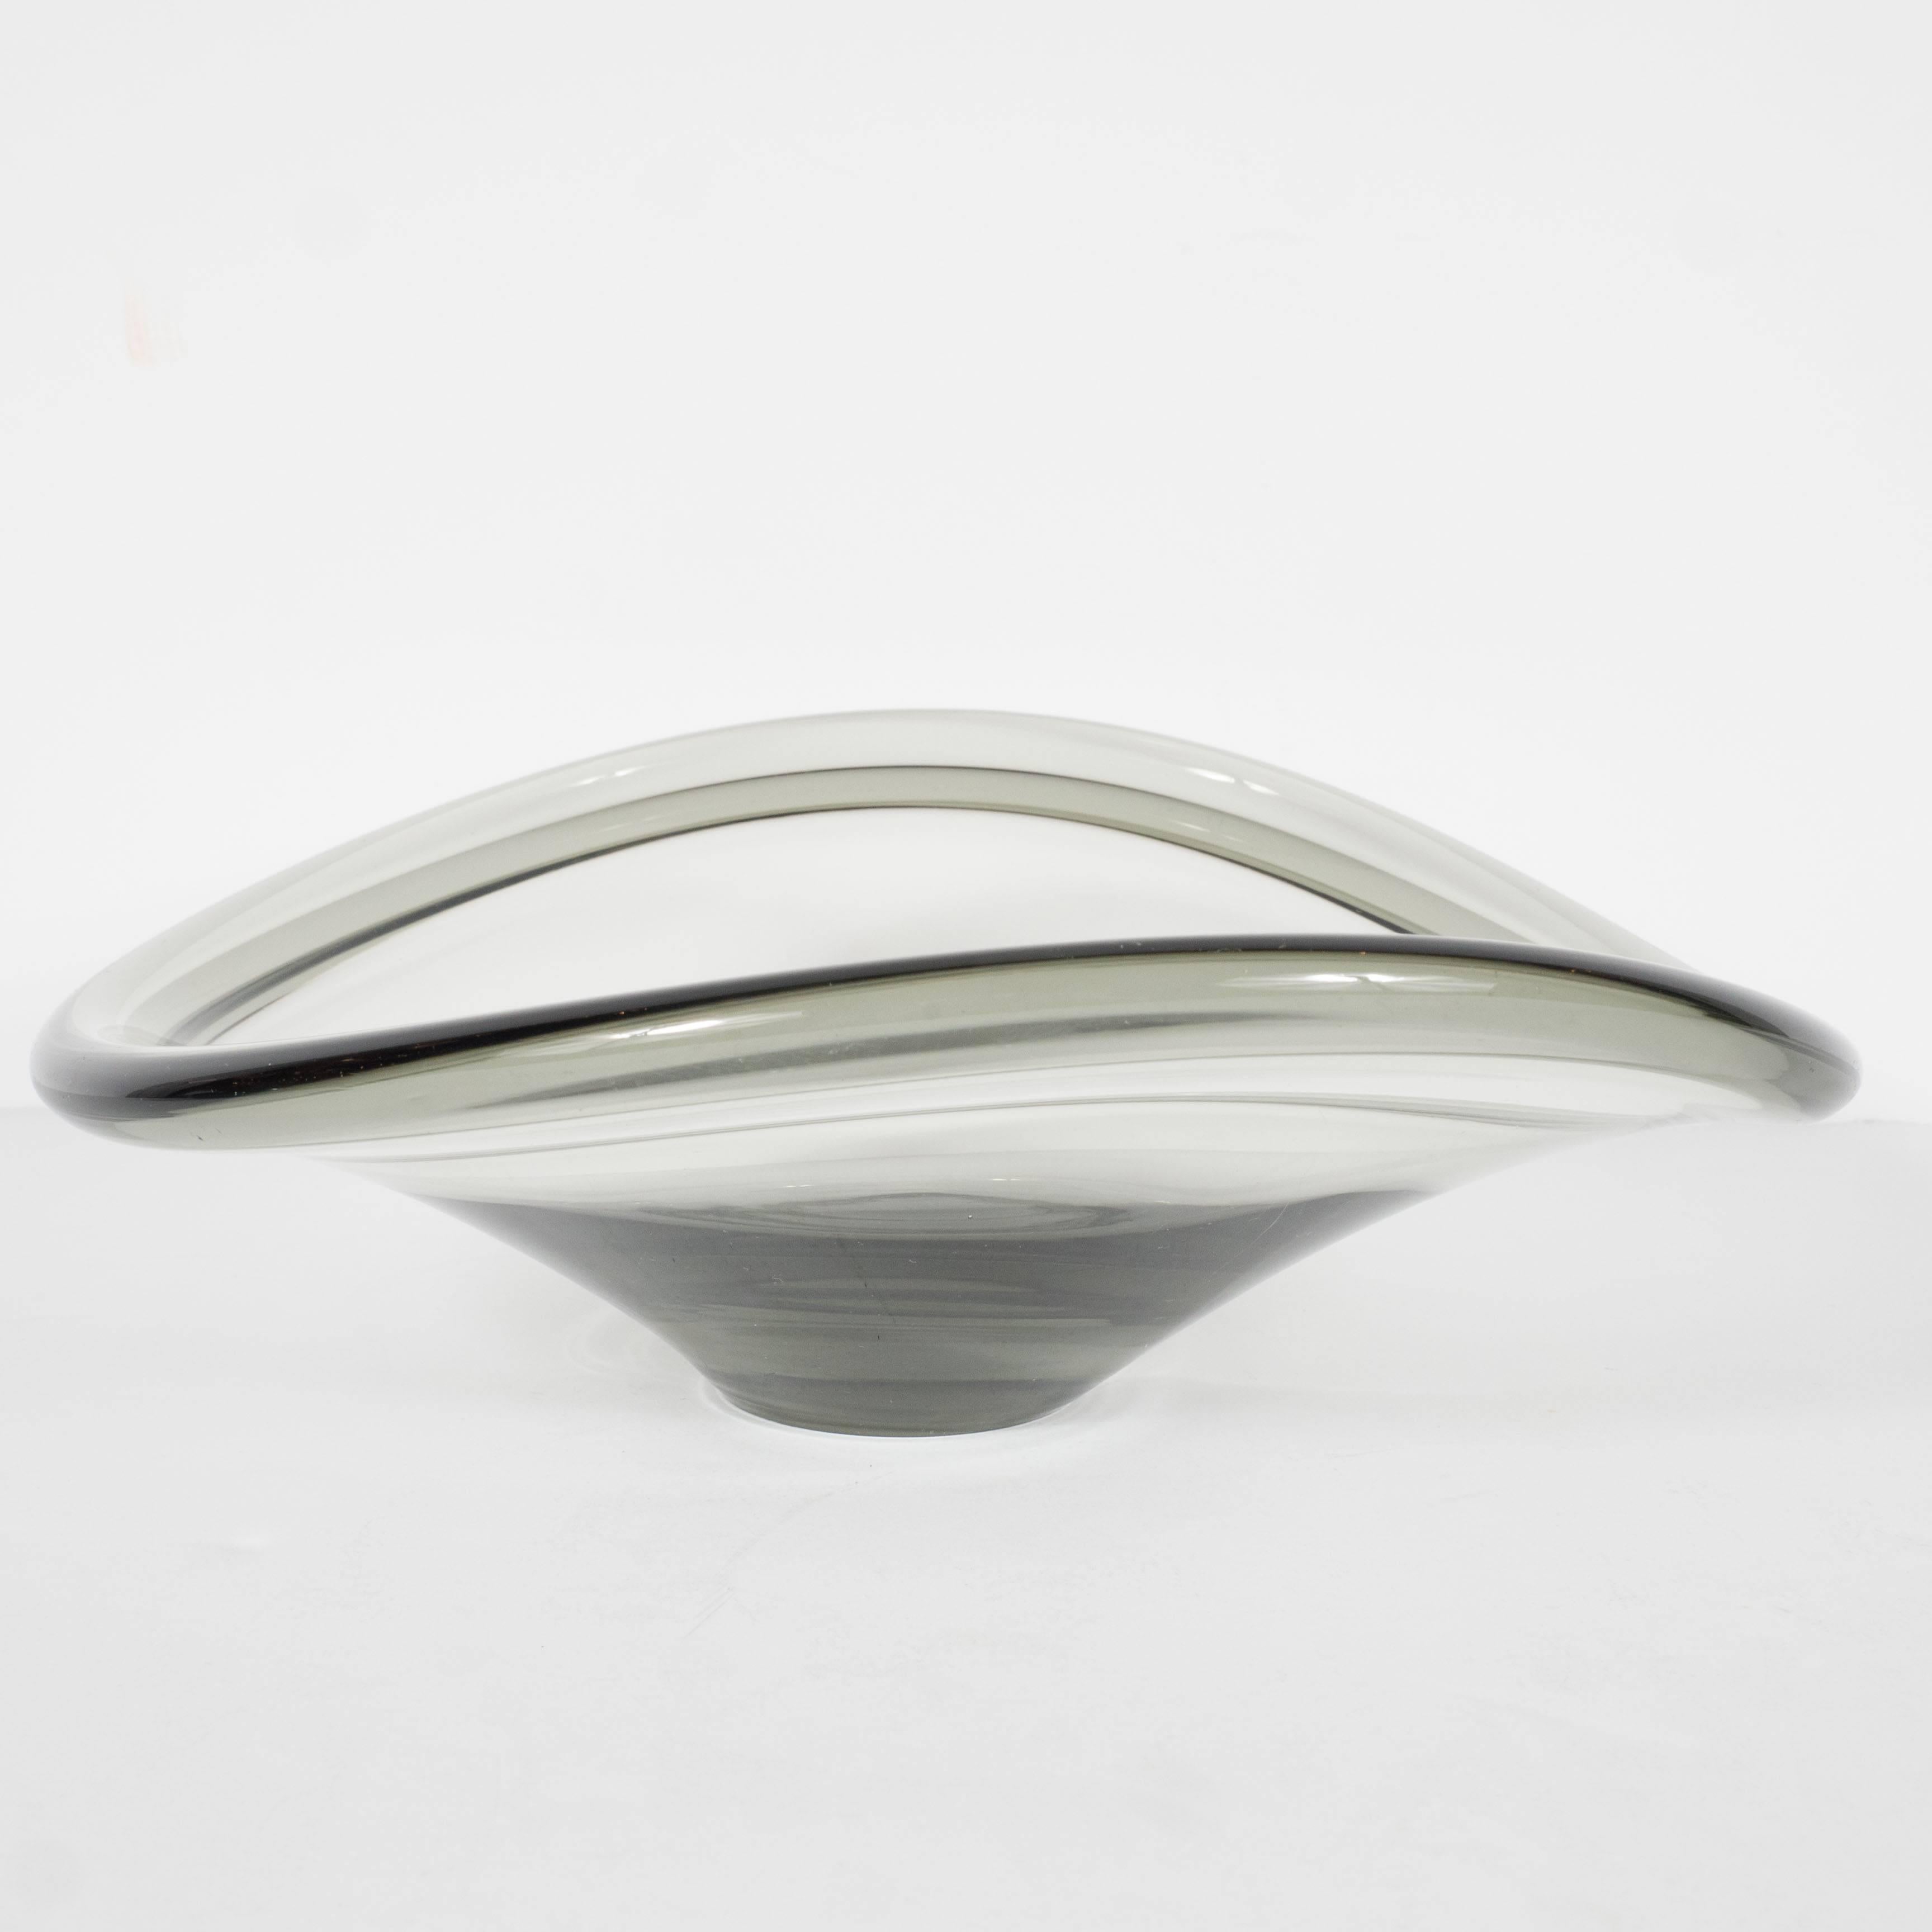 Danish Mid-Century Modernist Smoked Glass Curved Bowl by Holmegaard of Denmark For Sale